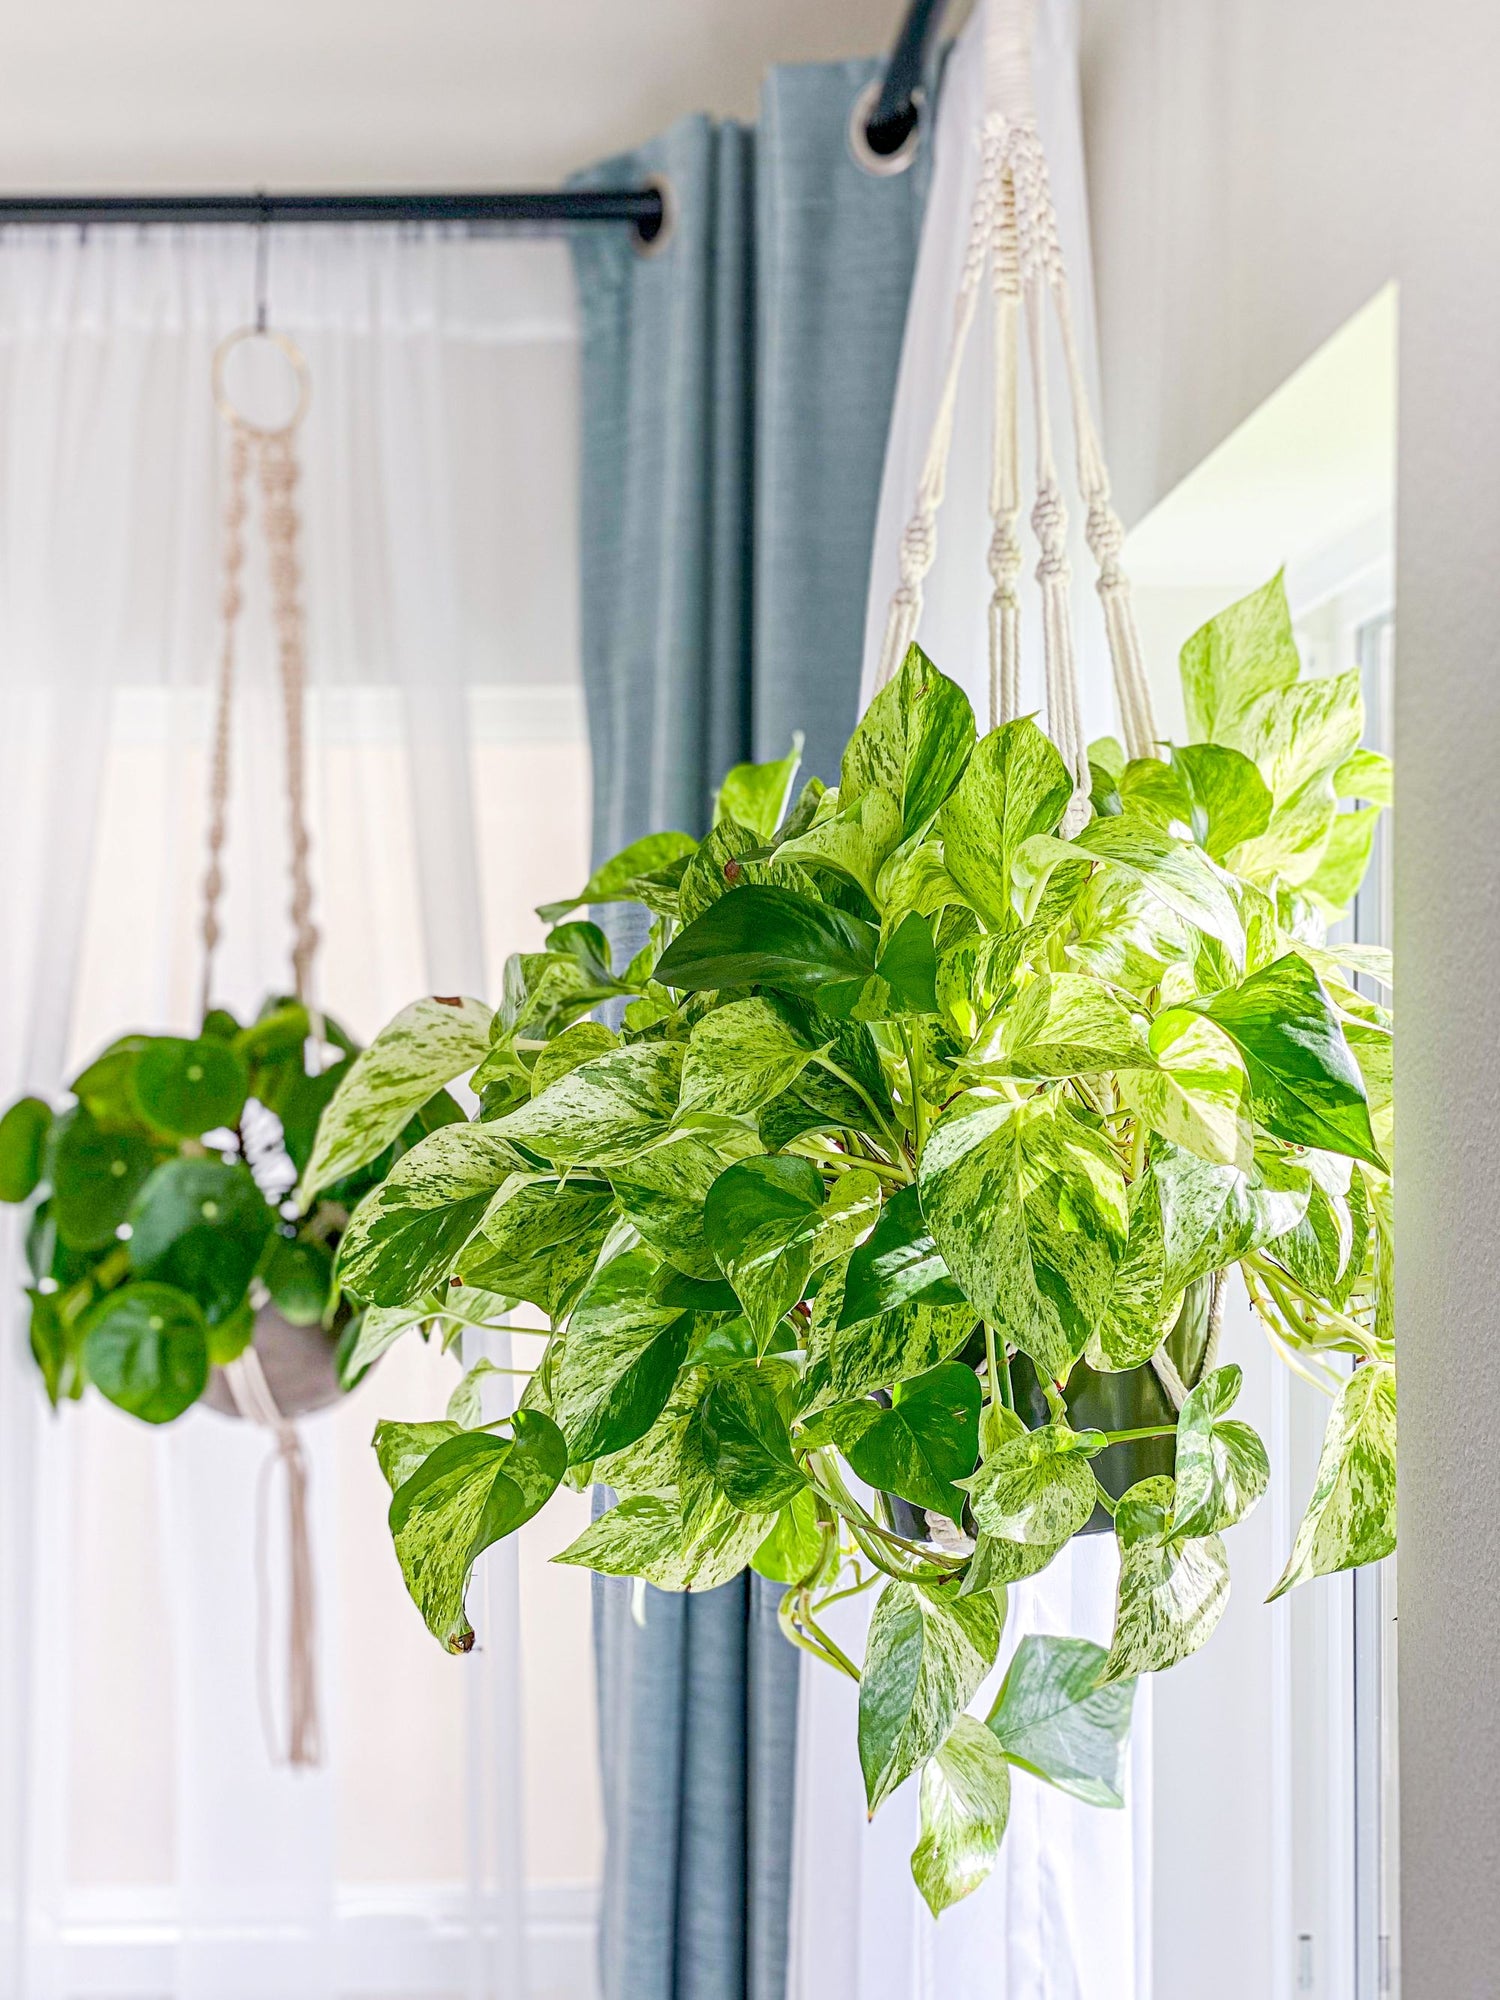 A marble queen pothos hanging in a macramé hanger from the ceiling in front of an open window. The window is framed with sheer curtains and blue drapes, allowing bright indirect sunlight to filter into the room. In the background, another houseplant, a pilea, can be seen hanging from the ceiling. Both plants appear healthy and lush, thriving in the sunlight.